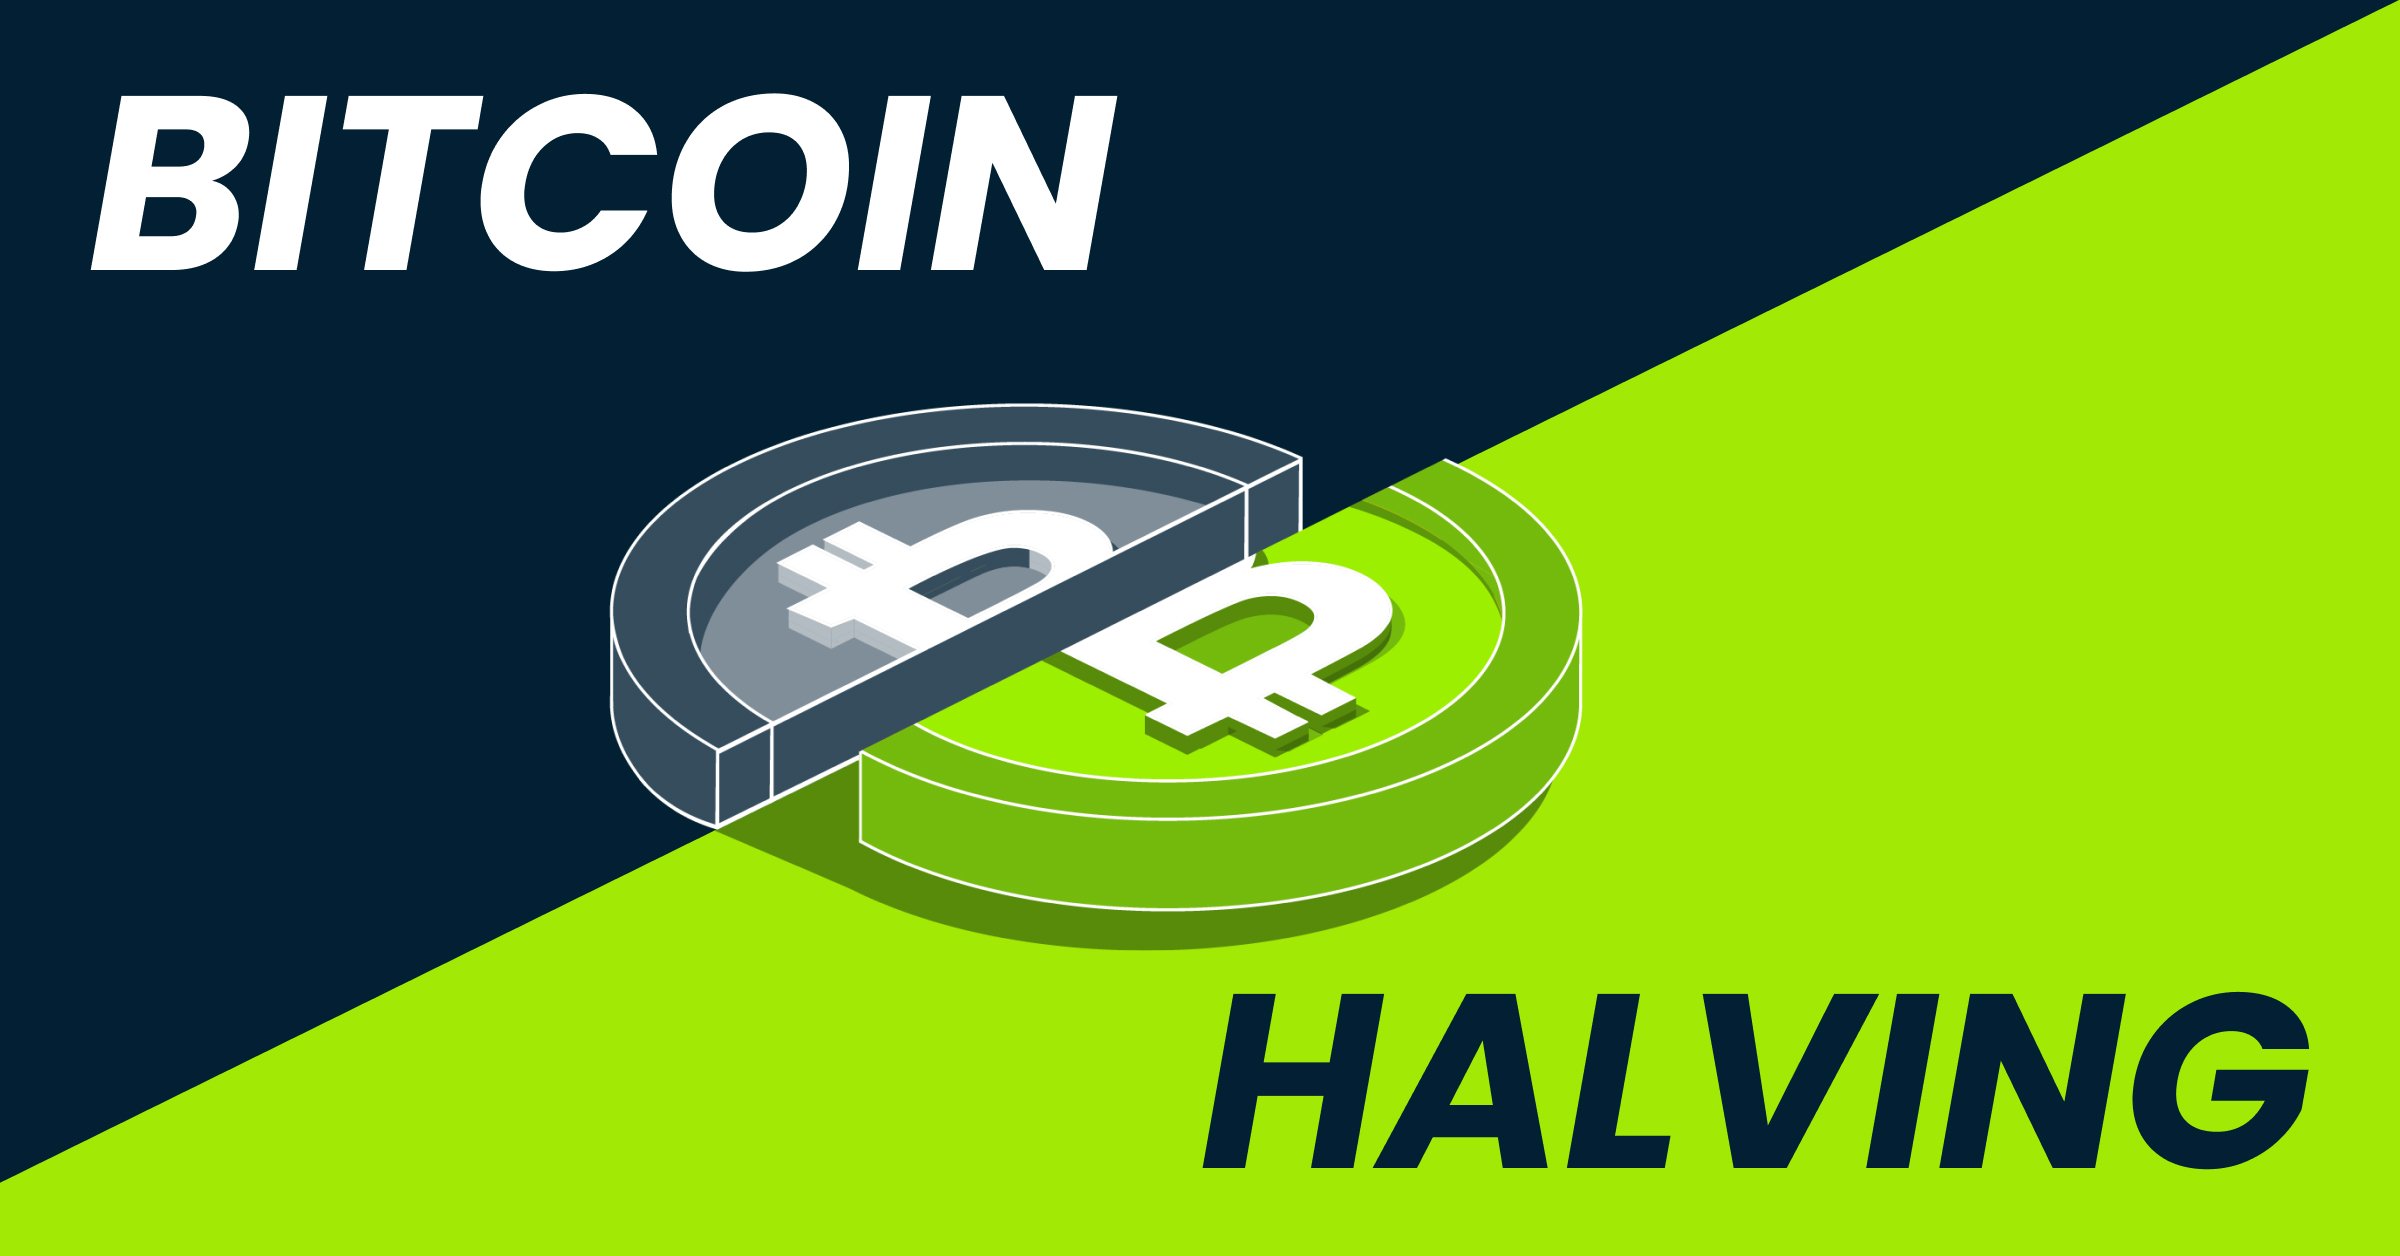 What is the Bitcoin halving?